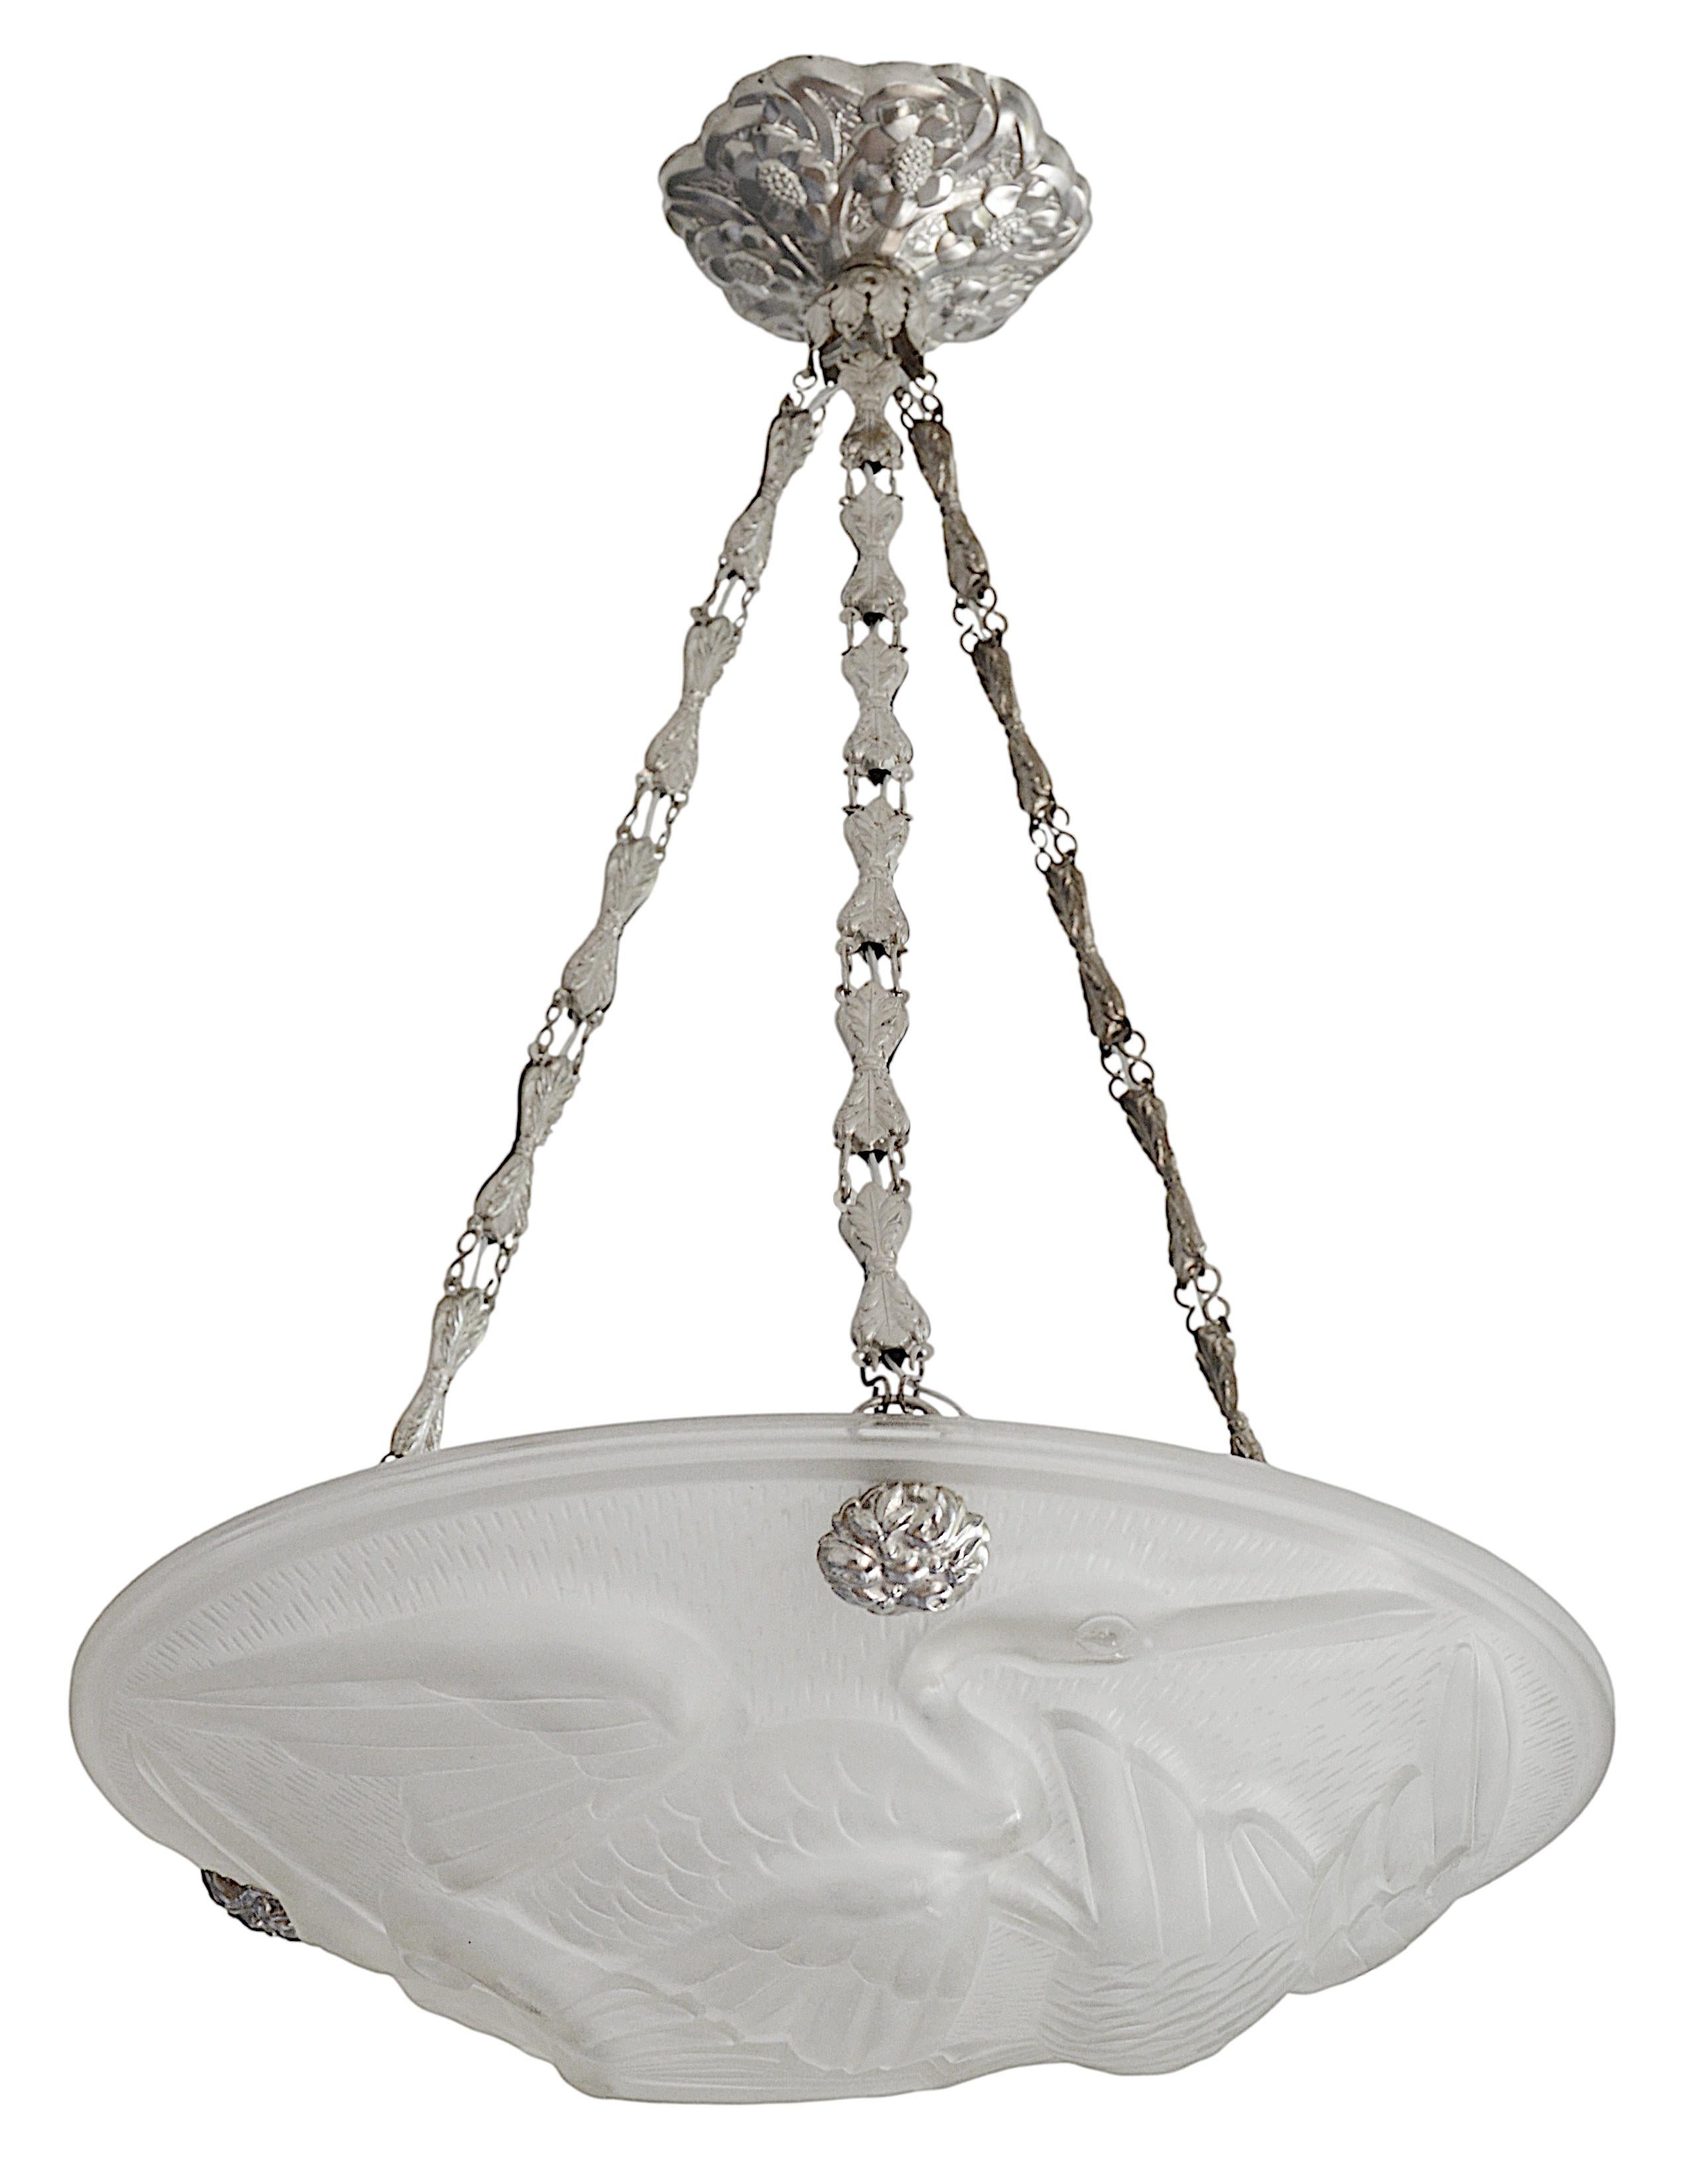 French Art Deco pendant chandelier by Jean Noverdy (Dijon), France, late 1920's. Frosted molded glass shade showing three storks. Silver-plated stamped brass frame. Height : 20.5